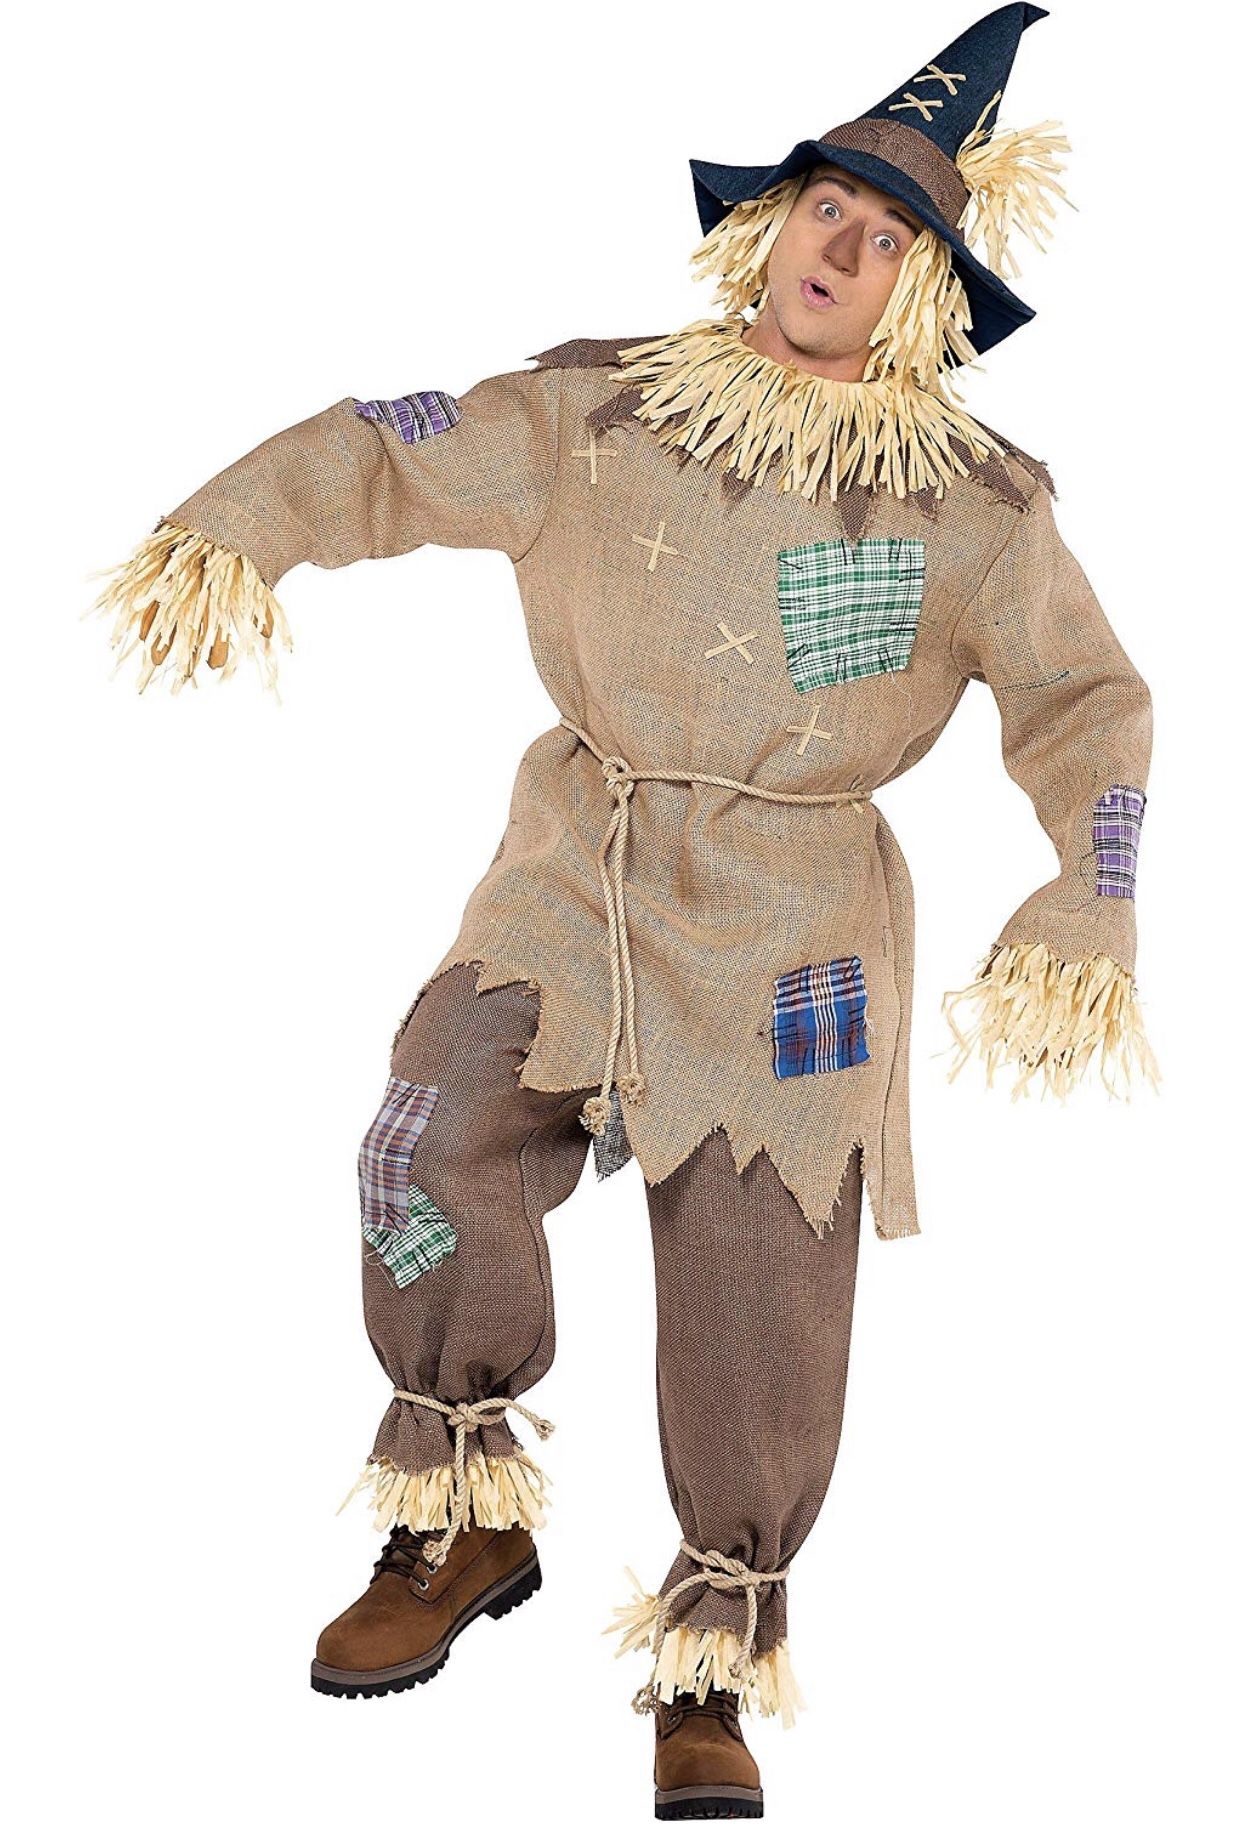 🎃New! Adult “SCARECROW” Costume!💥CHECK OUT MY PAGE FOR LOTS MORE HALLOWEEN COSTUMES!💥💥